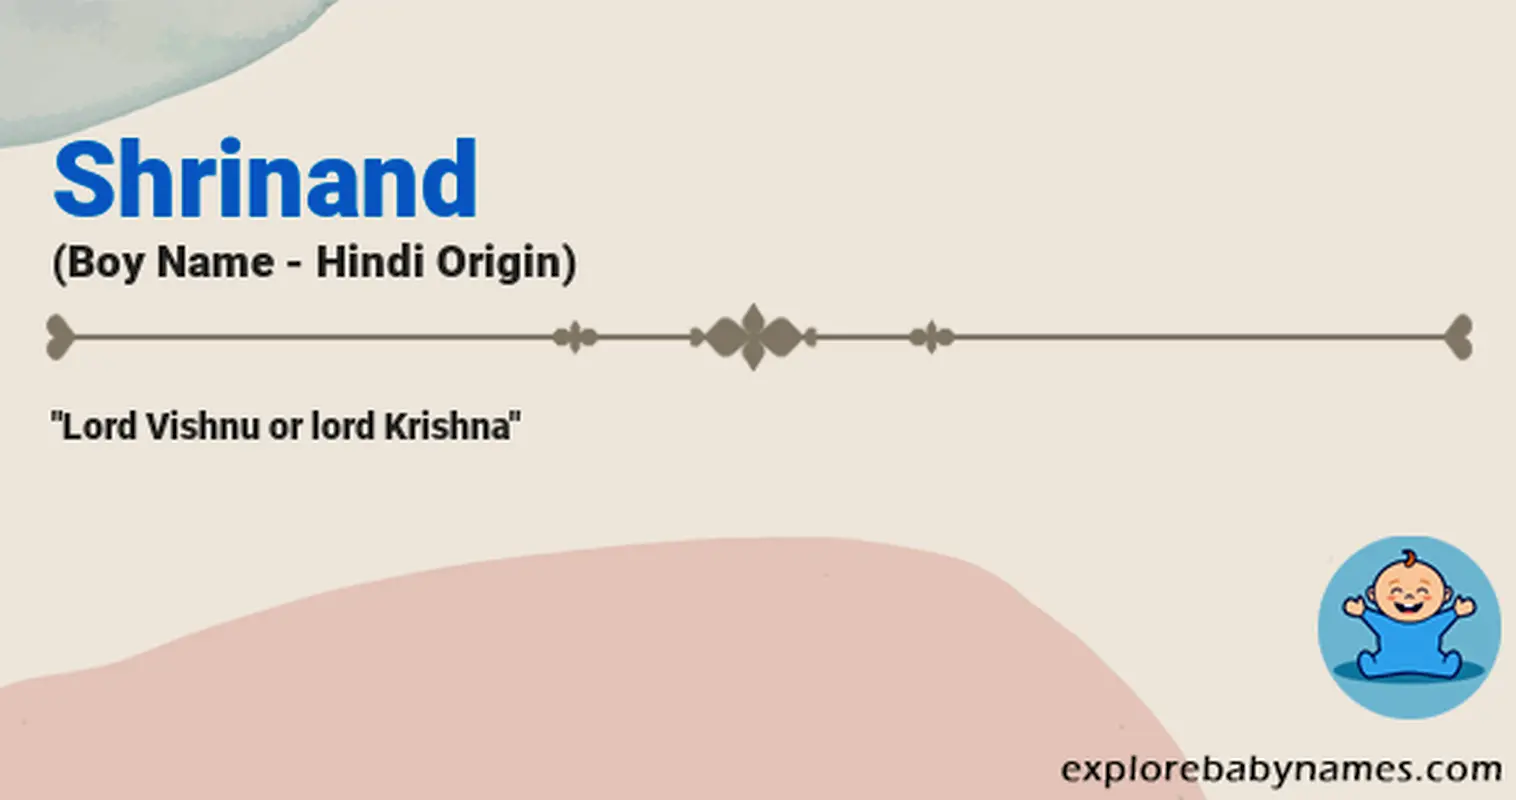 Meaning of Shrinand